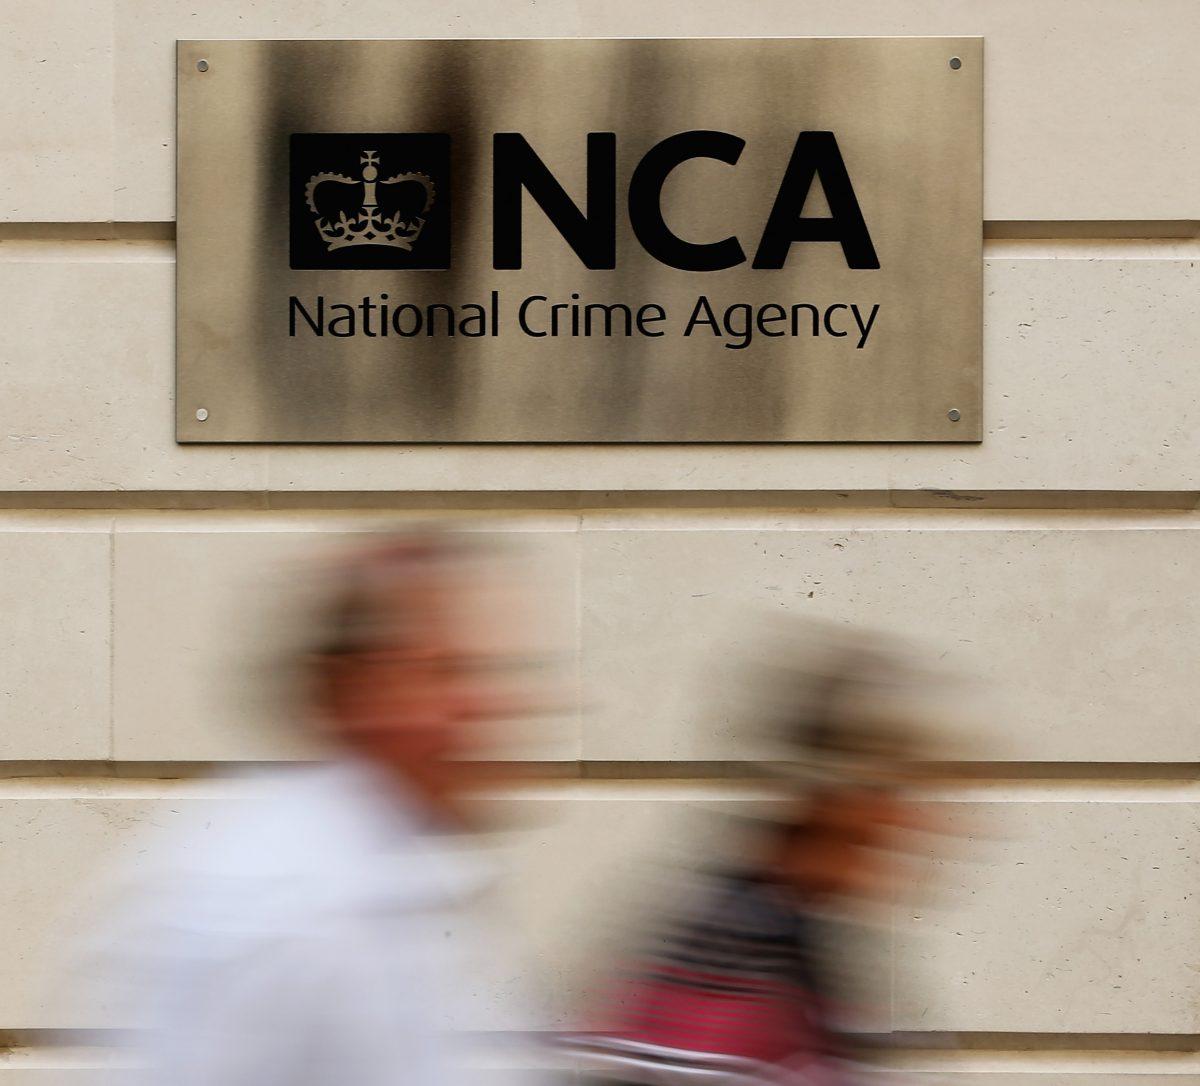 The National Crime Agency building in London on Oct. 7, 2013. (Dan Kitwood/Getty Images)